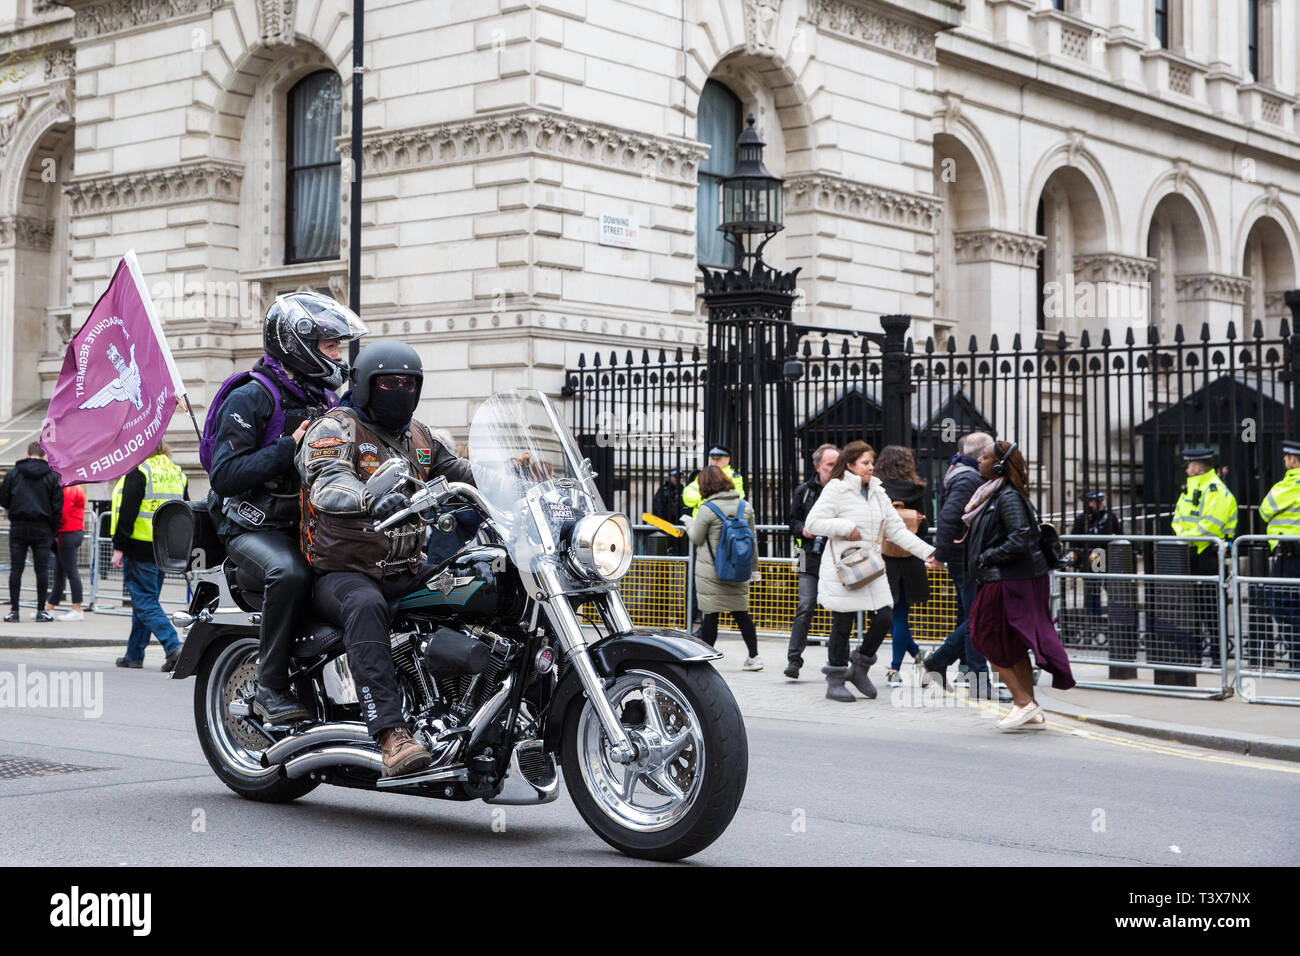 London, UK. 12th April 2019. Bikers in Whitehall attend the Rolling Thunder Ride for Soldier F organised by Harry Wragg and other armed forces veterans in support of the 77-year-old former soldier known as Soldier F who is to be prosecuted for the murders of James Wray and William McKinney at a civil rights march in Londonderry on Bloody Sunday in 1972. Credit: Mark Kerrison/Alamy Live News Stock Photo